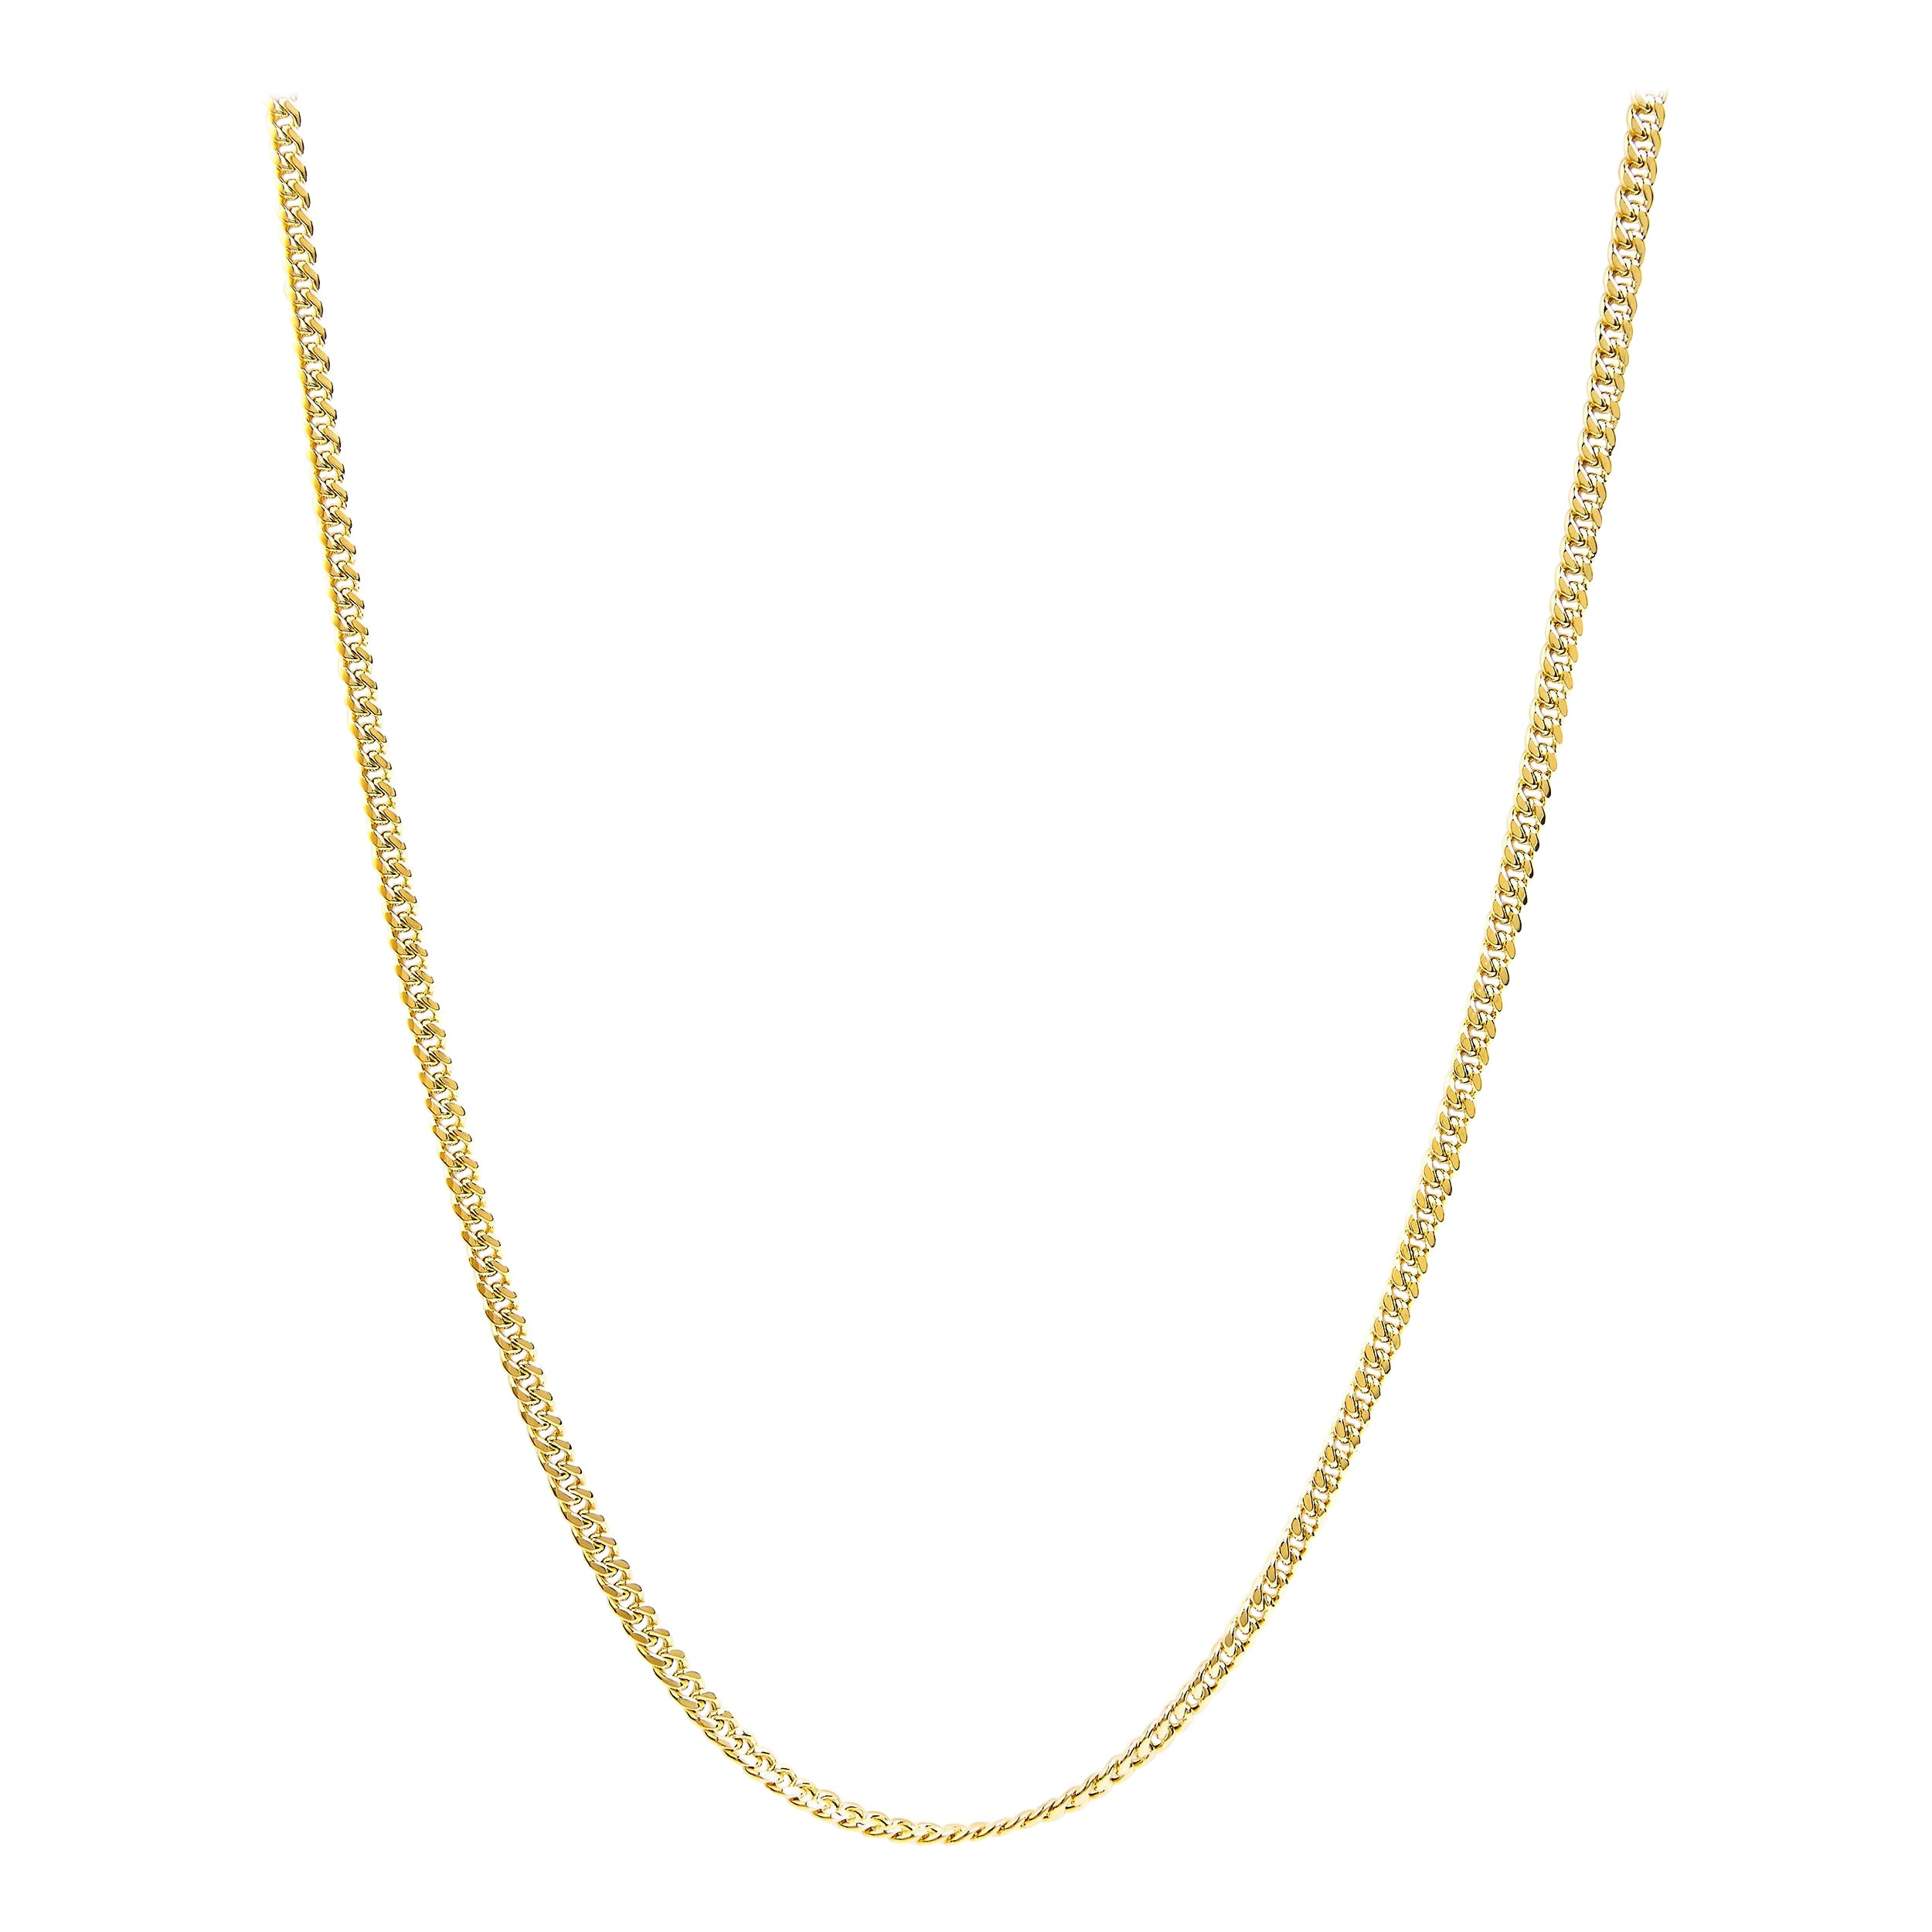 Semi-Solid 14K Yellow Gold 4.5mm Miami Cuban Chain Necklace - 22 Inches For Sale